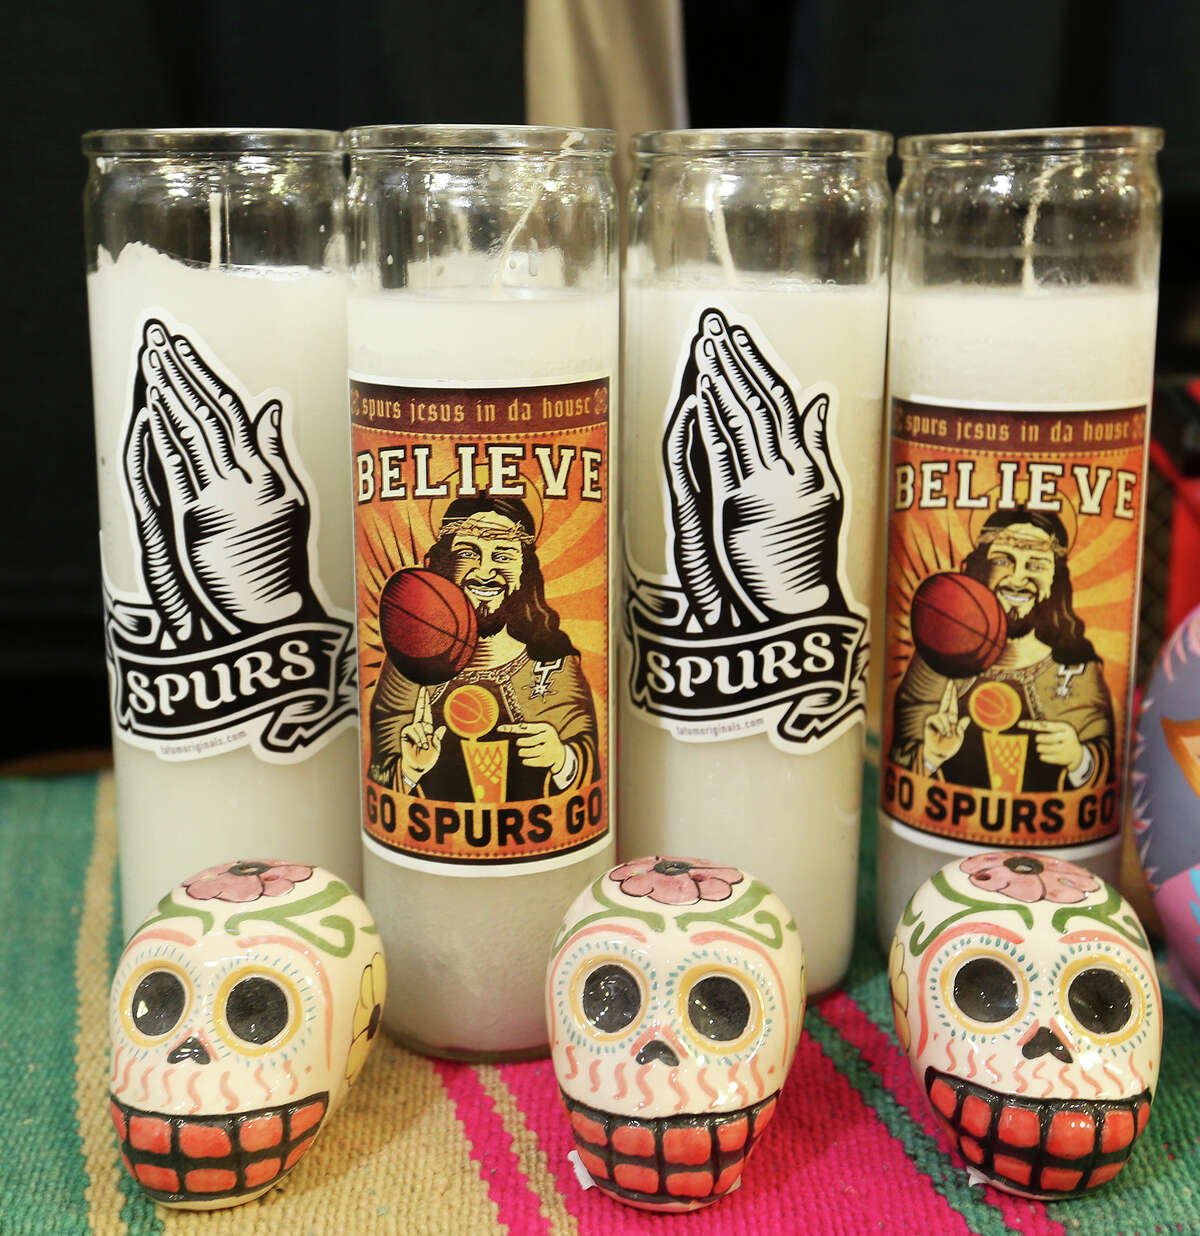 "Spurs Jesus" merchandise is for sale at Melissa Guerra in the Pearl Brewery complex, Monday, May 26, 2014. The candles and t-shirts were designed through a collaboration between Spurs Jesus and artist Robert Tatum. The proceeds from the sales will be donated to elementary school teachers for art supplies.